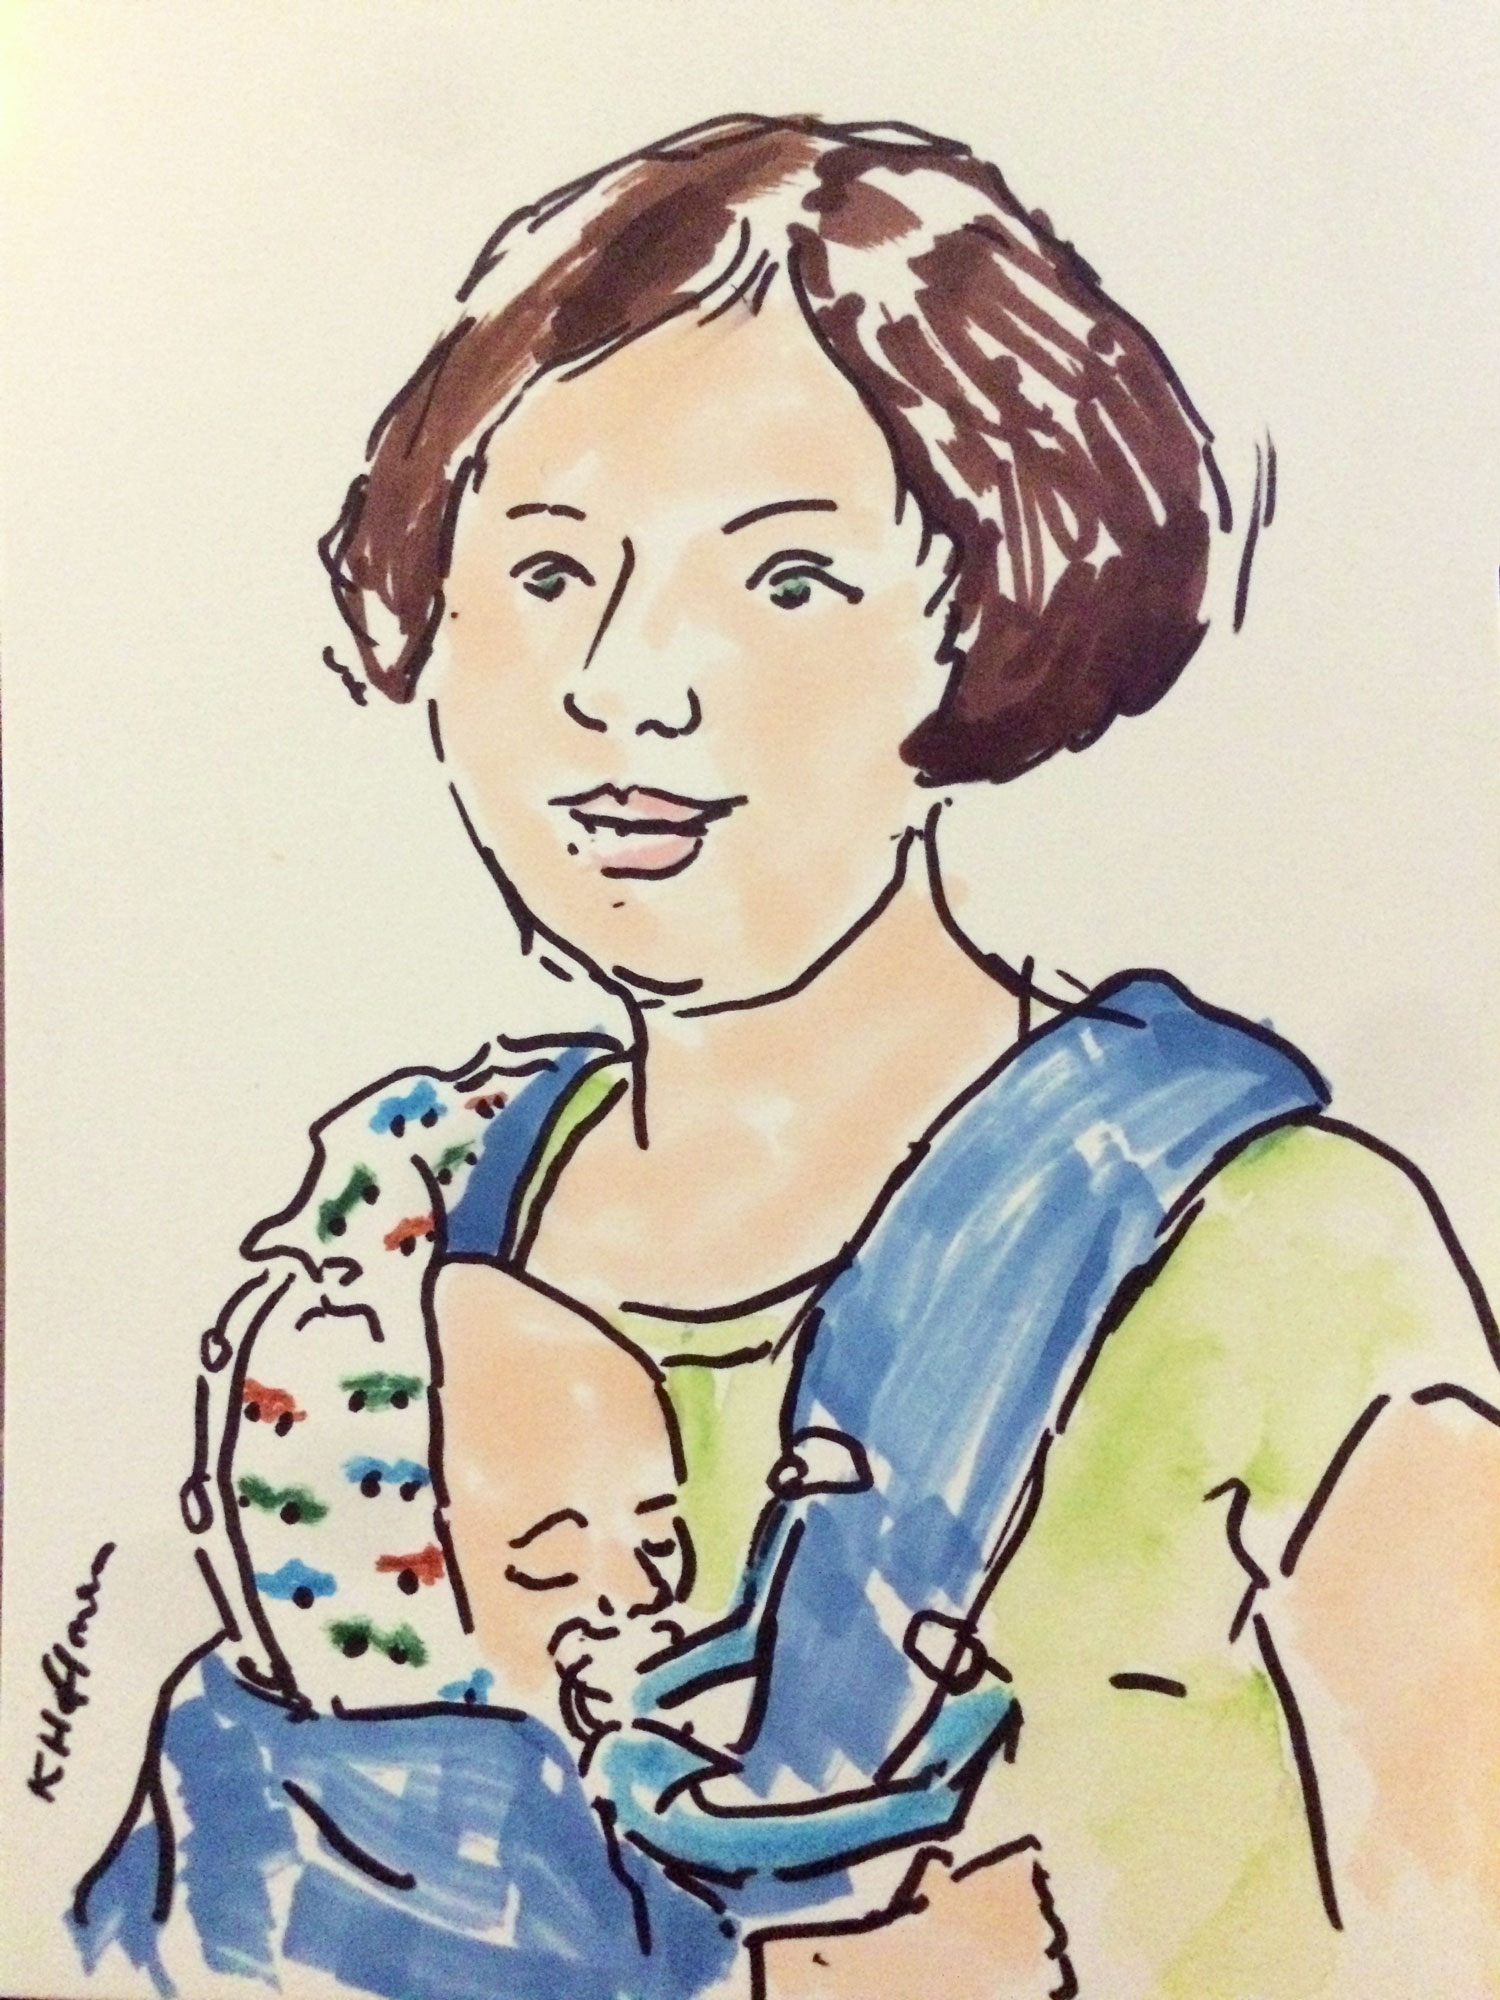 I drew this woman and her infant at an Event Drawing for my book, Mannheim wimmelt. This was done in a Marker technique using Copic Markers on absorbant paper.